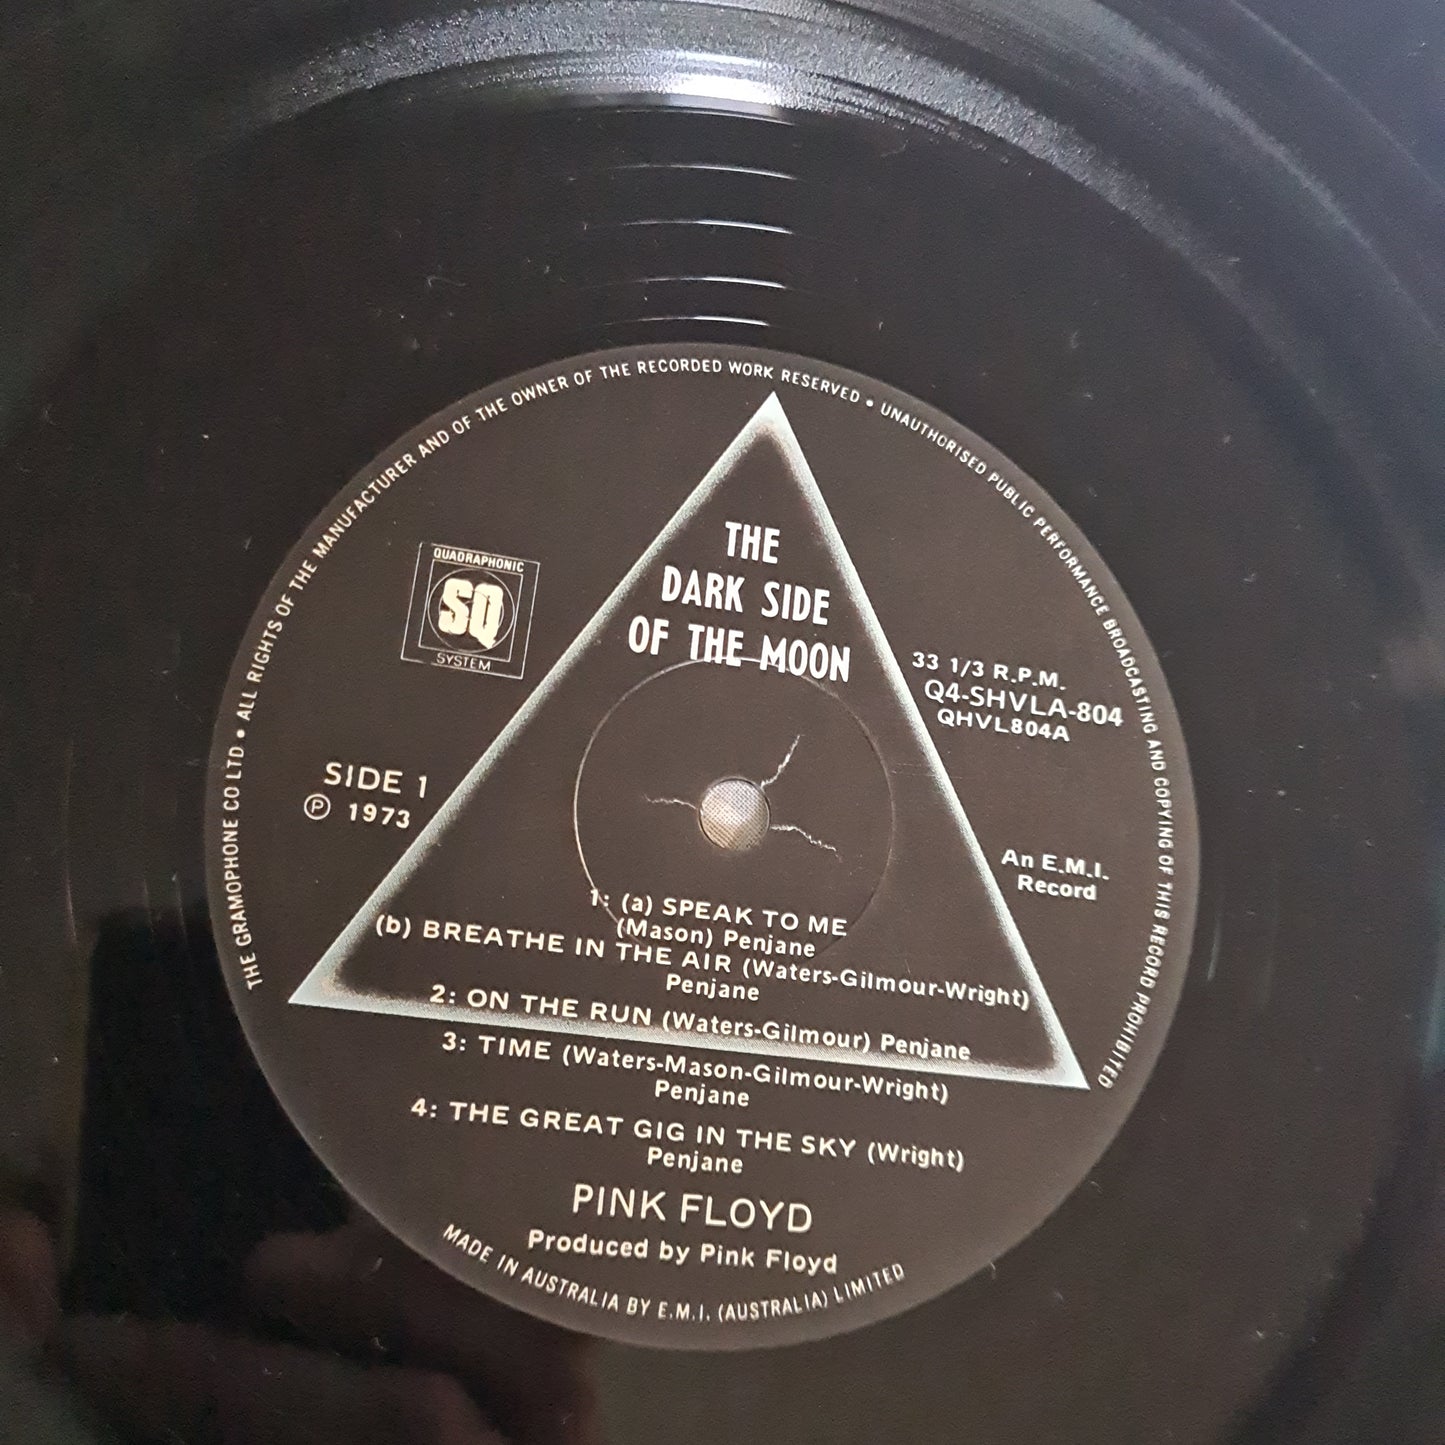 Pink Floyd – Dark Side Of The Moon - 1973 (Quadraphonic- with 2 Posters) - Vinyl Record